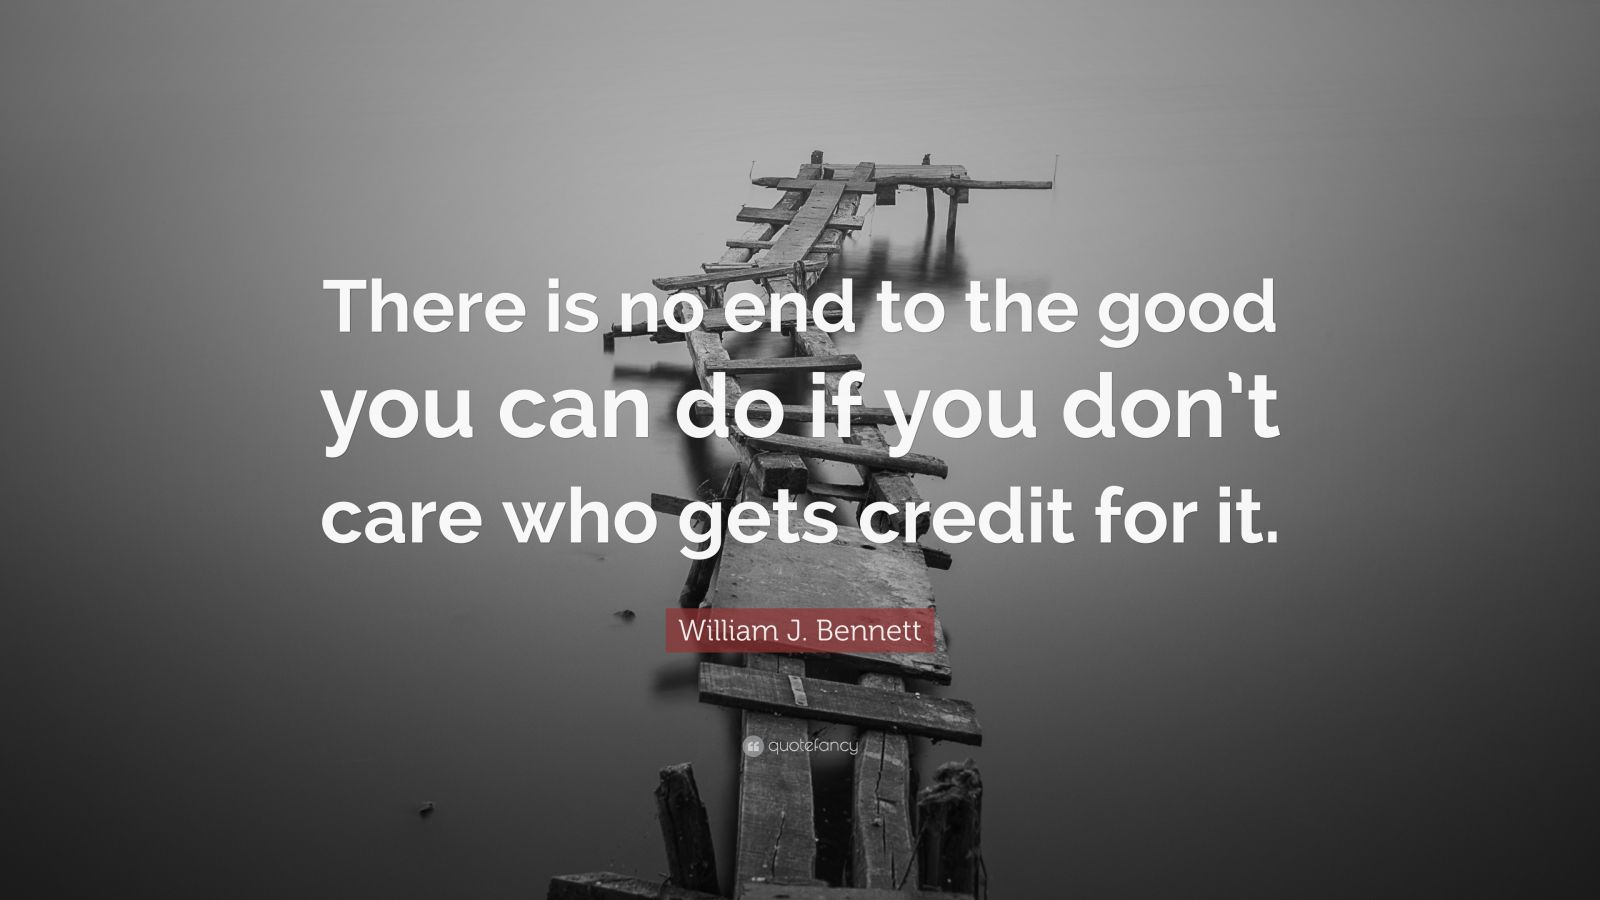 William J Bennett Quote “there Is No End To The Good You Can Do If You Dont Care Who Gets 